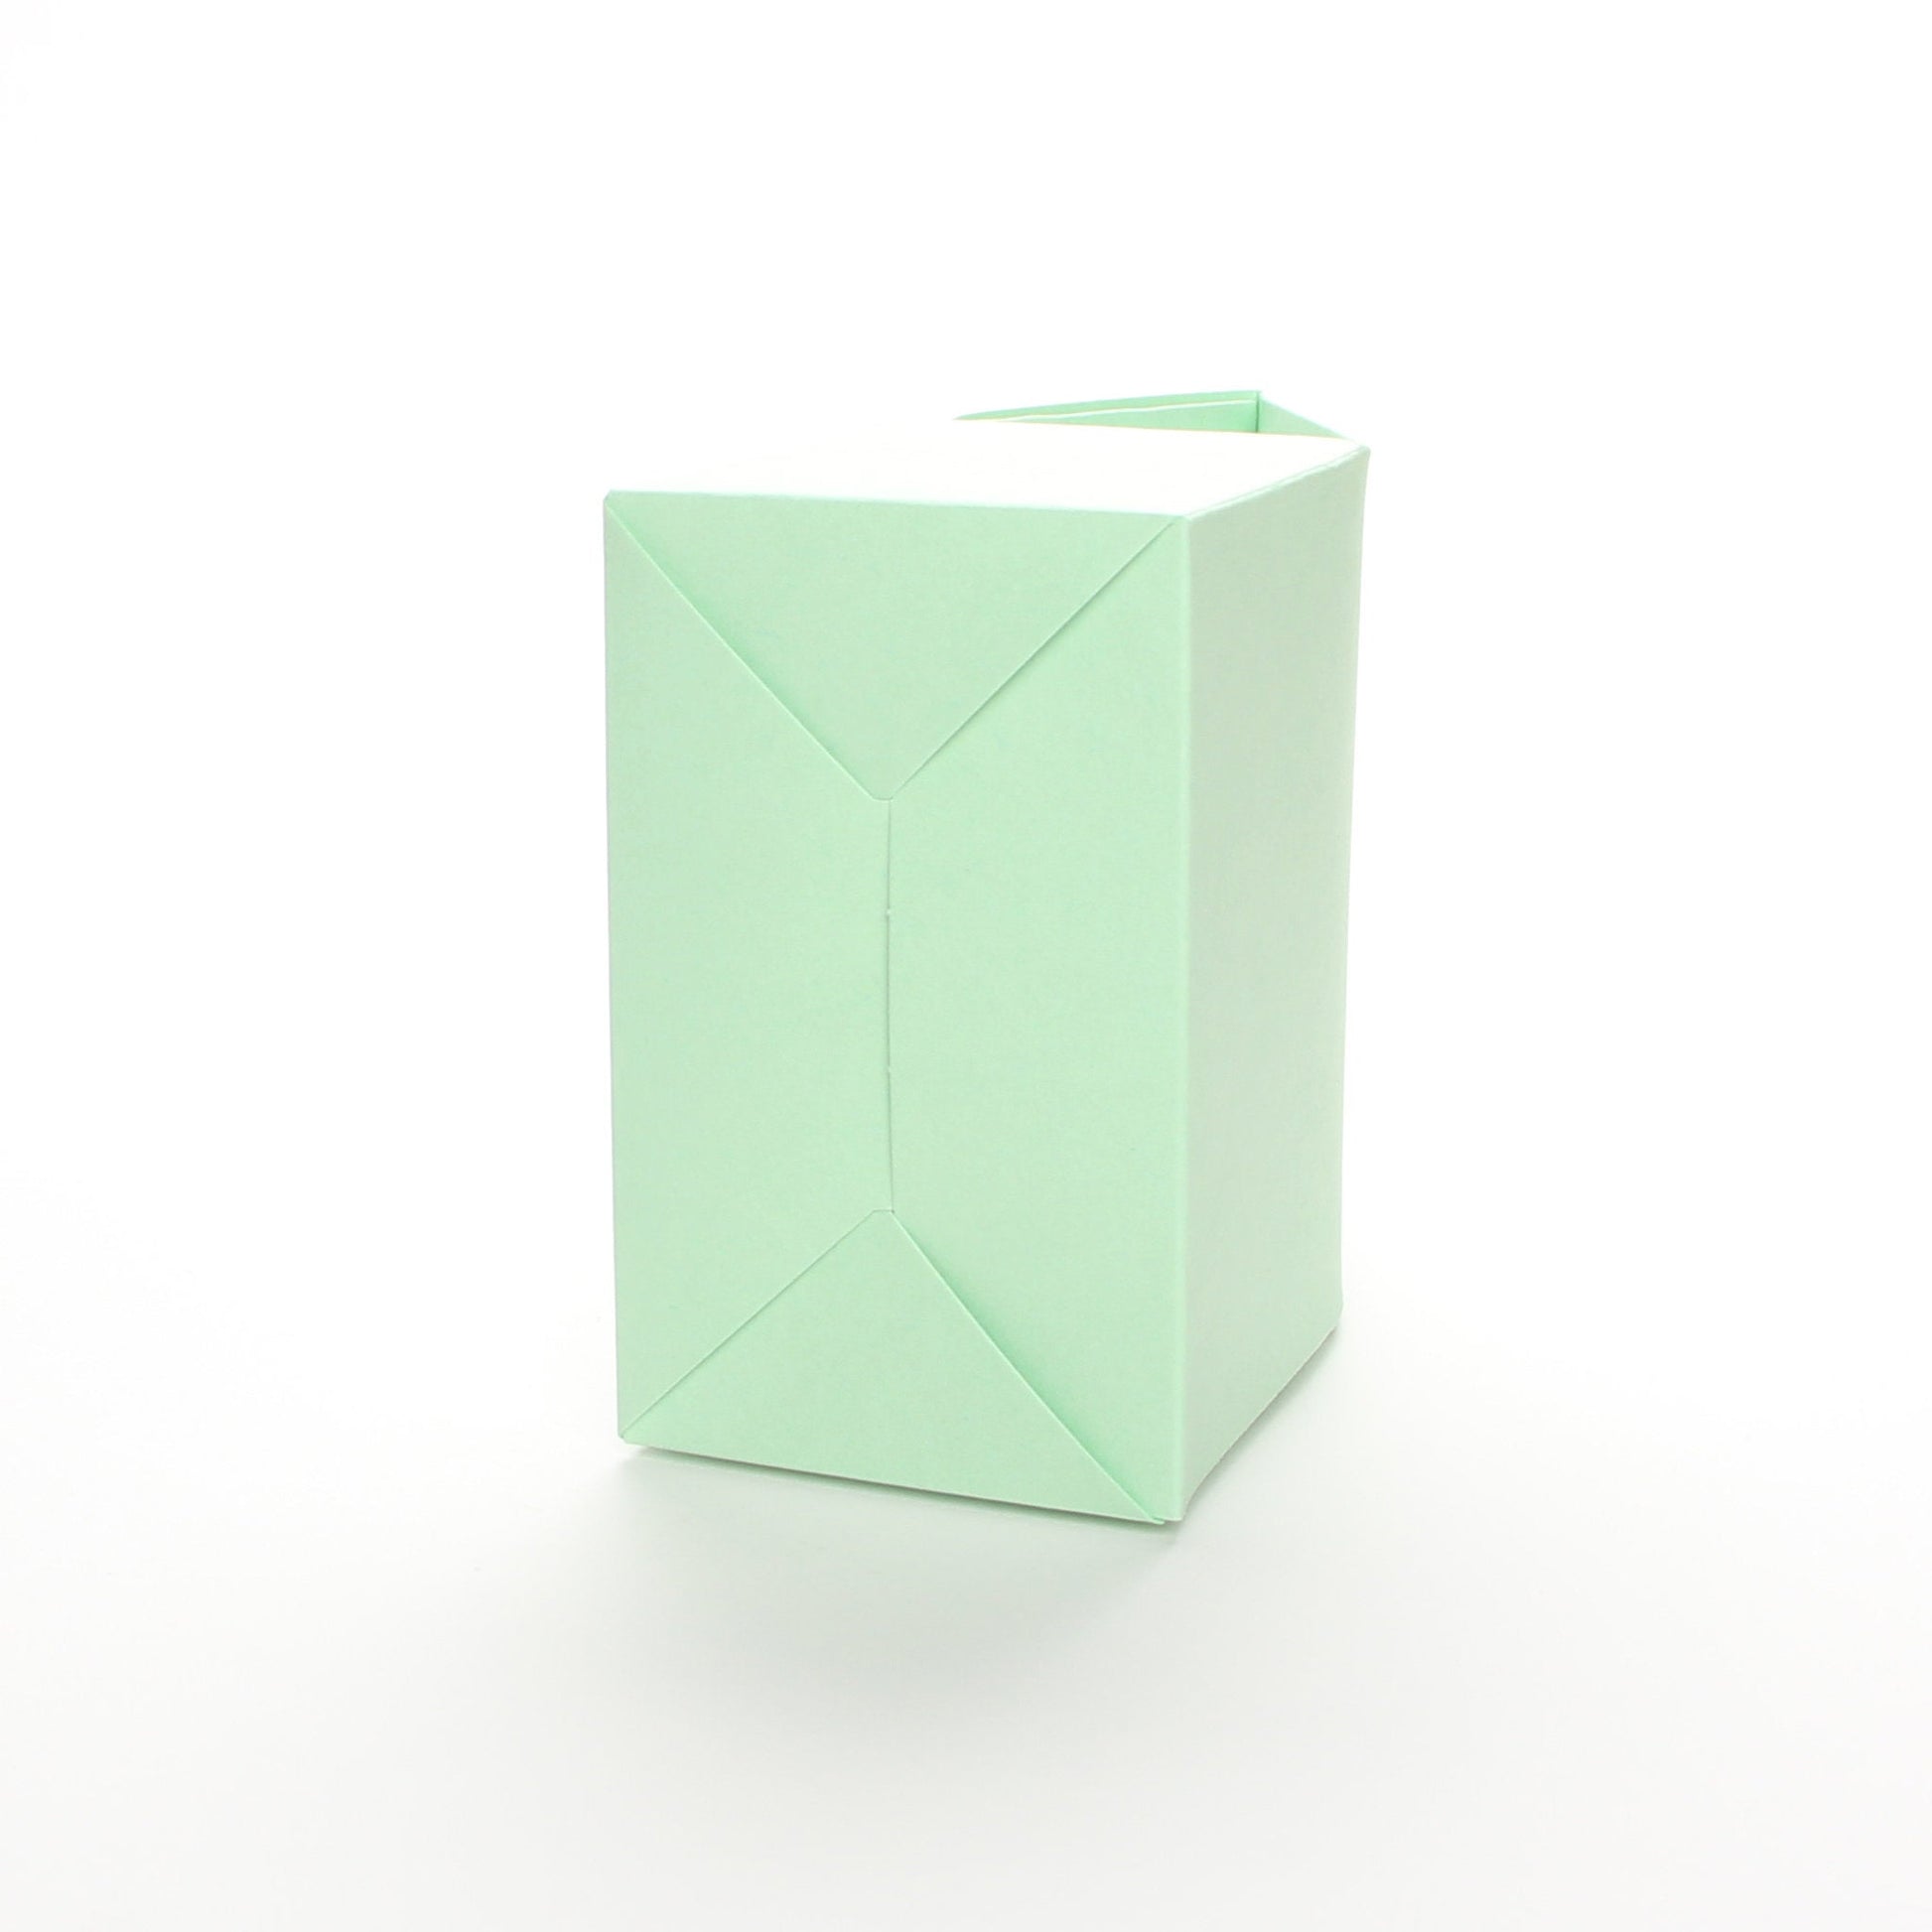 Bottom view of Lux Party’s mint green favor box on a white background.